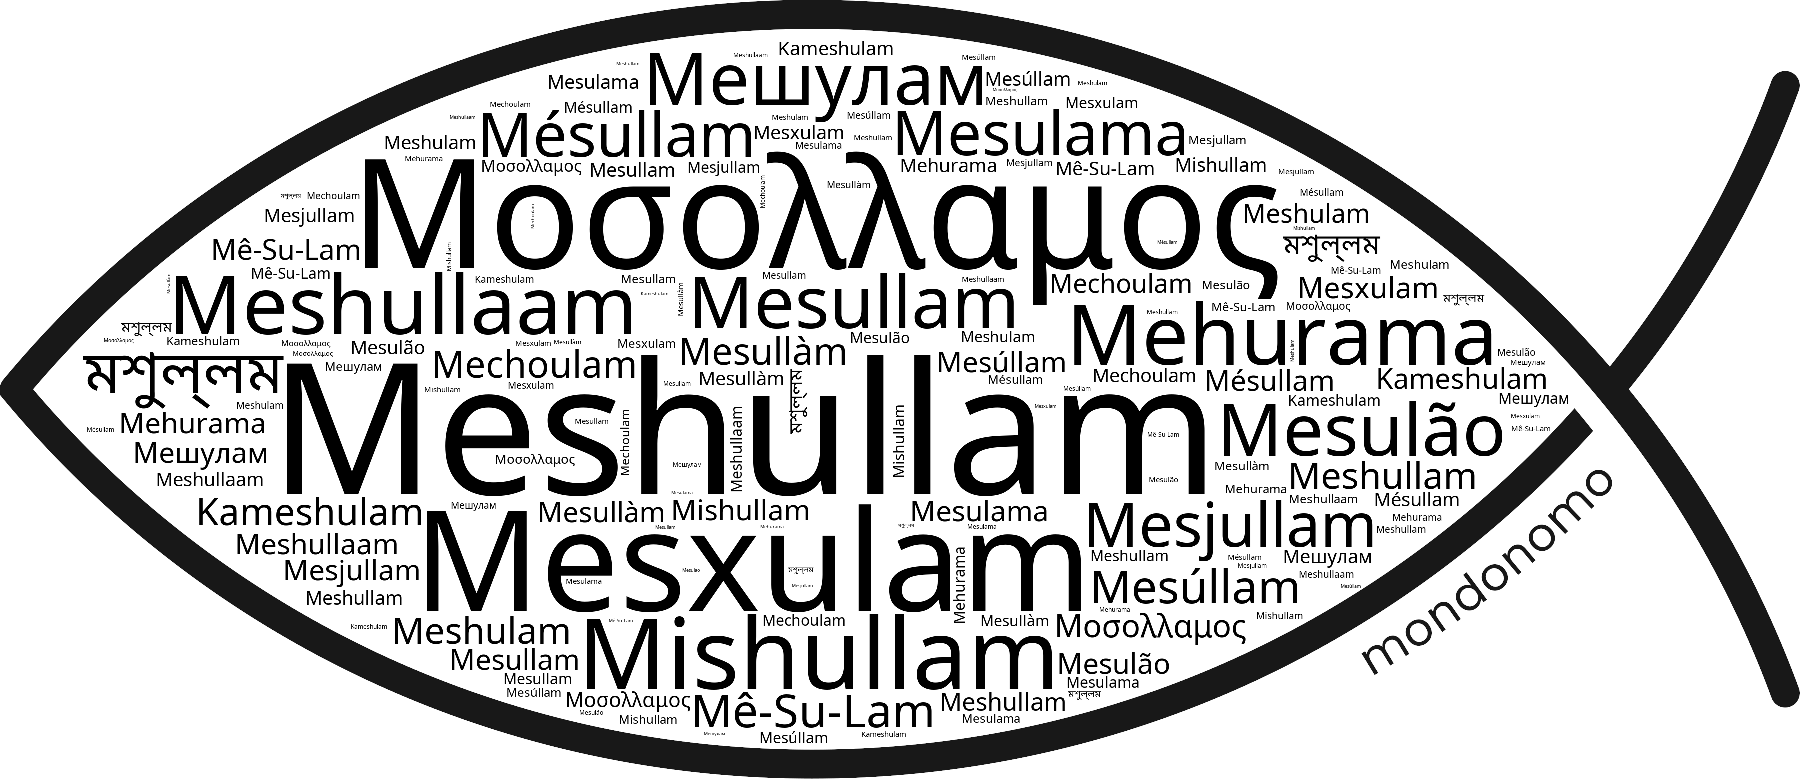 Name Meshullam in the world's Bibles